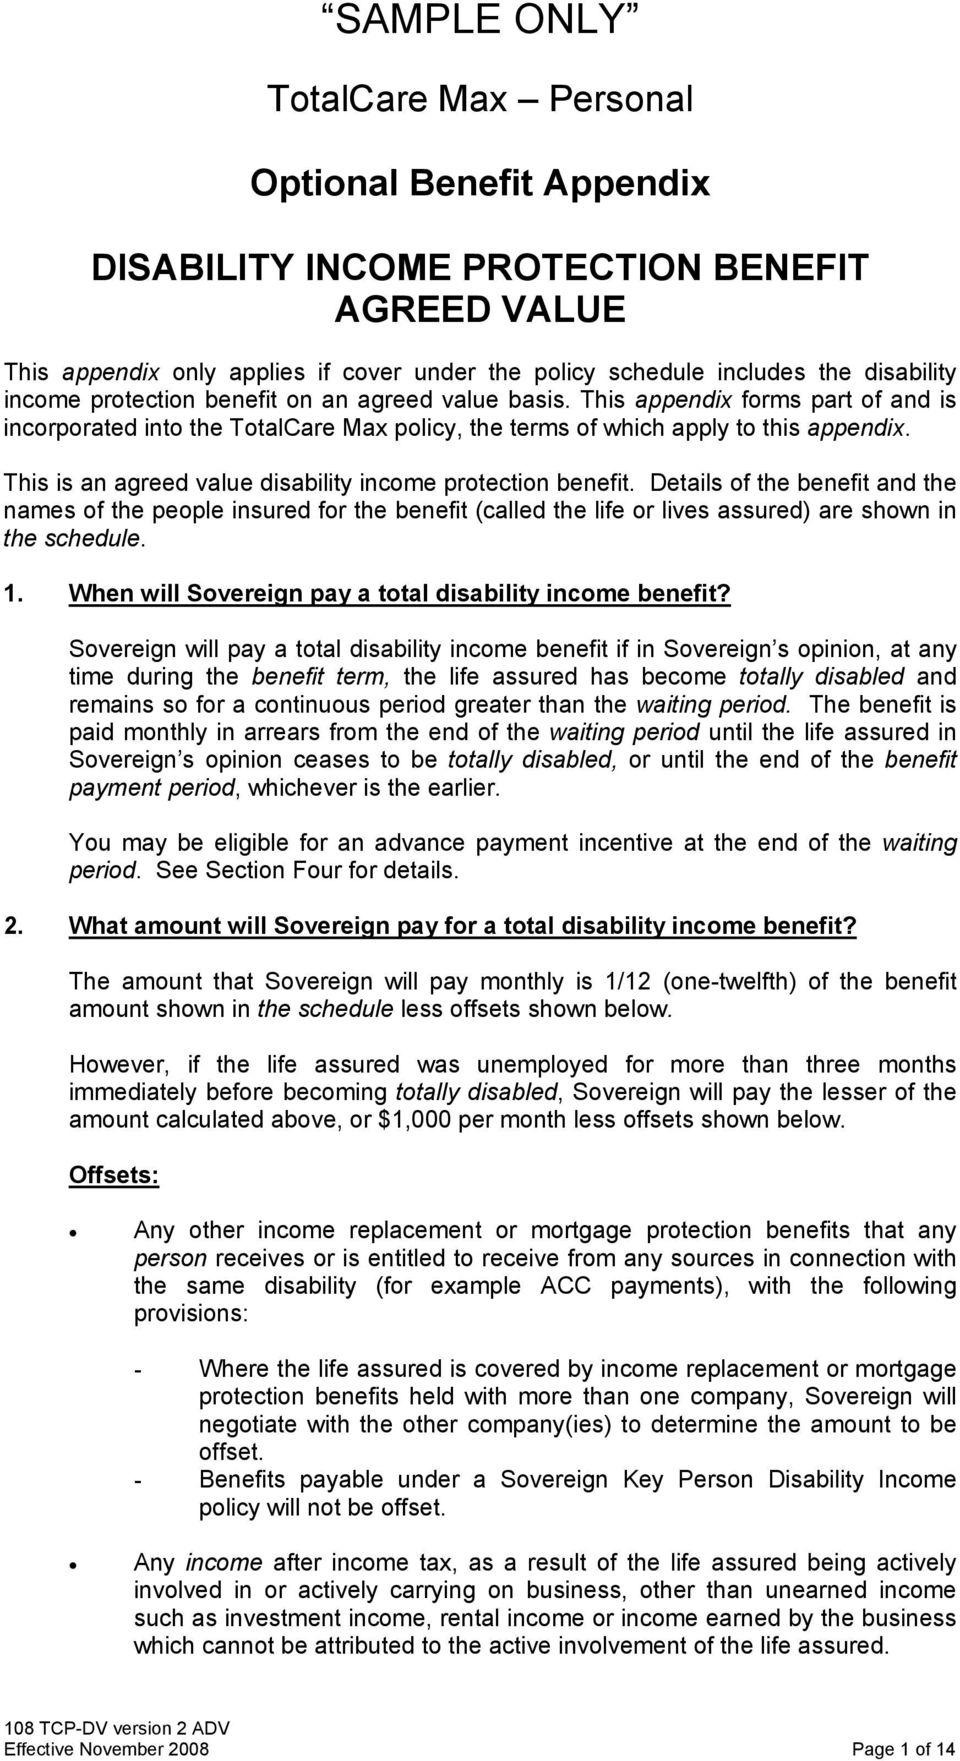 This is an agreed value disability income protection benefit. Details of the benefit and the names of the people insured for the benefit (called the life or lives assured) are shown in the schedule.